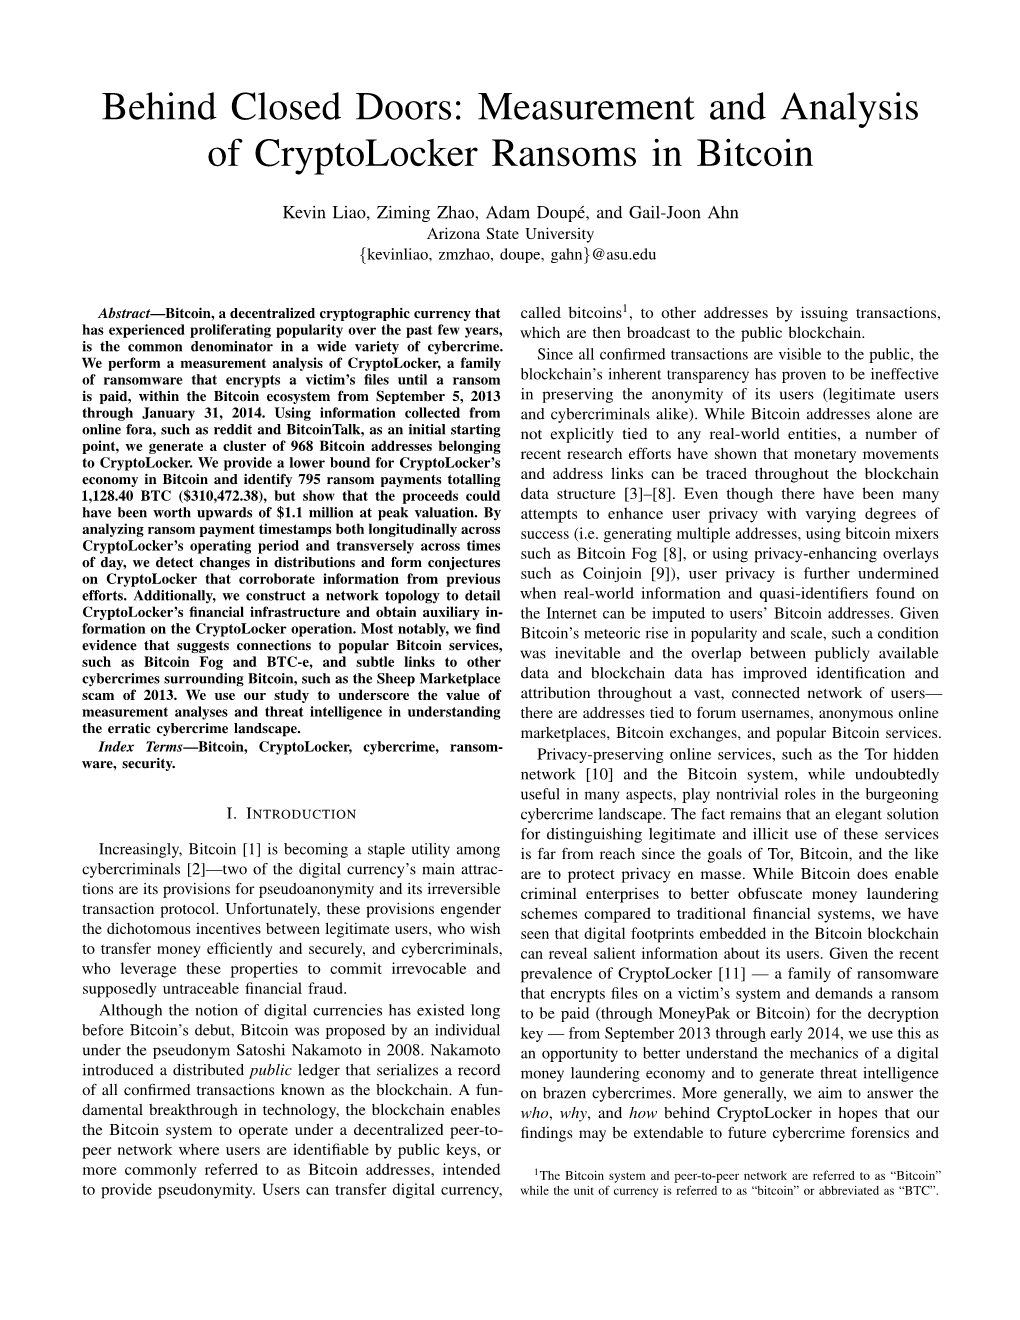 Measurement and Analysis of Cryptolocker Ransoms in Bitcoin